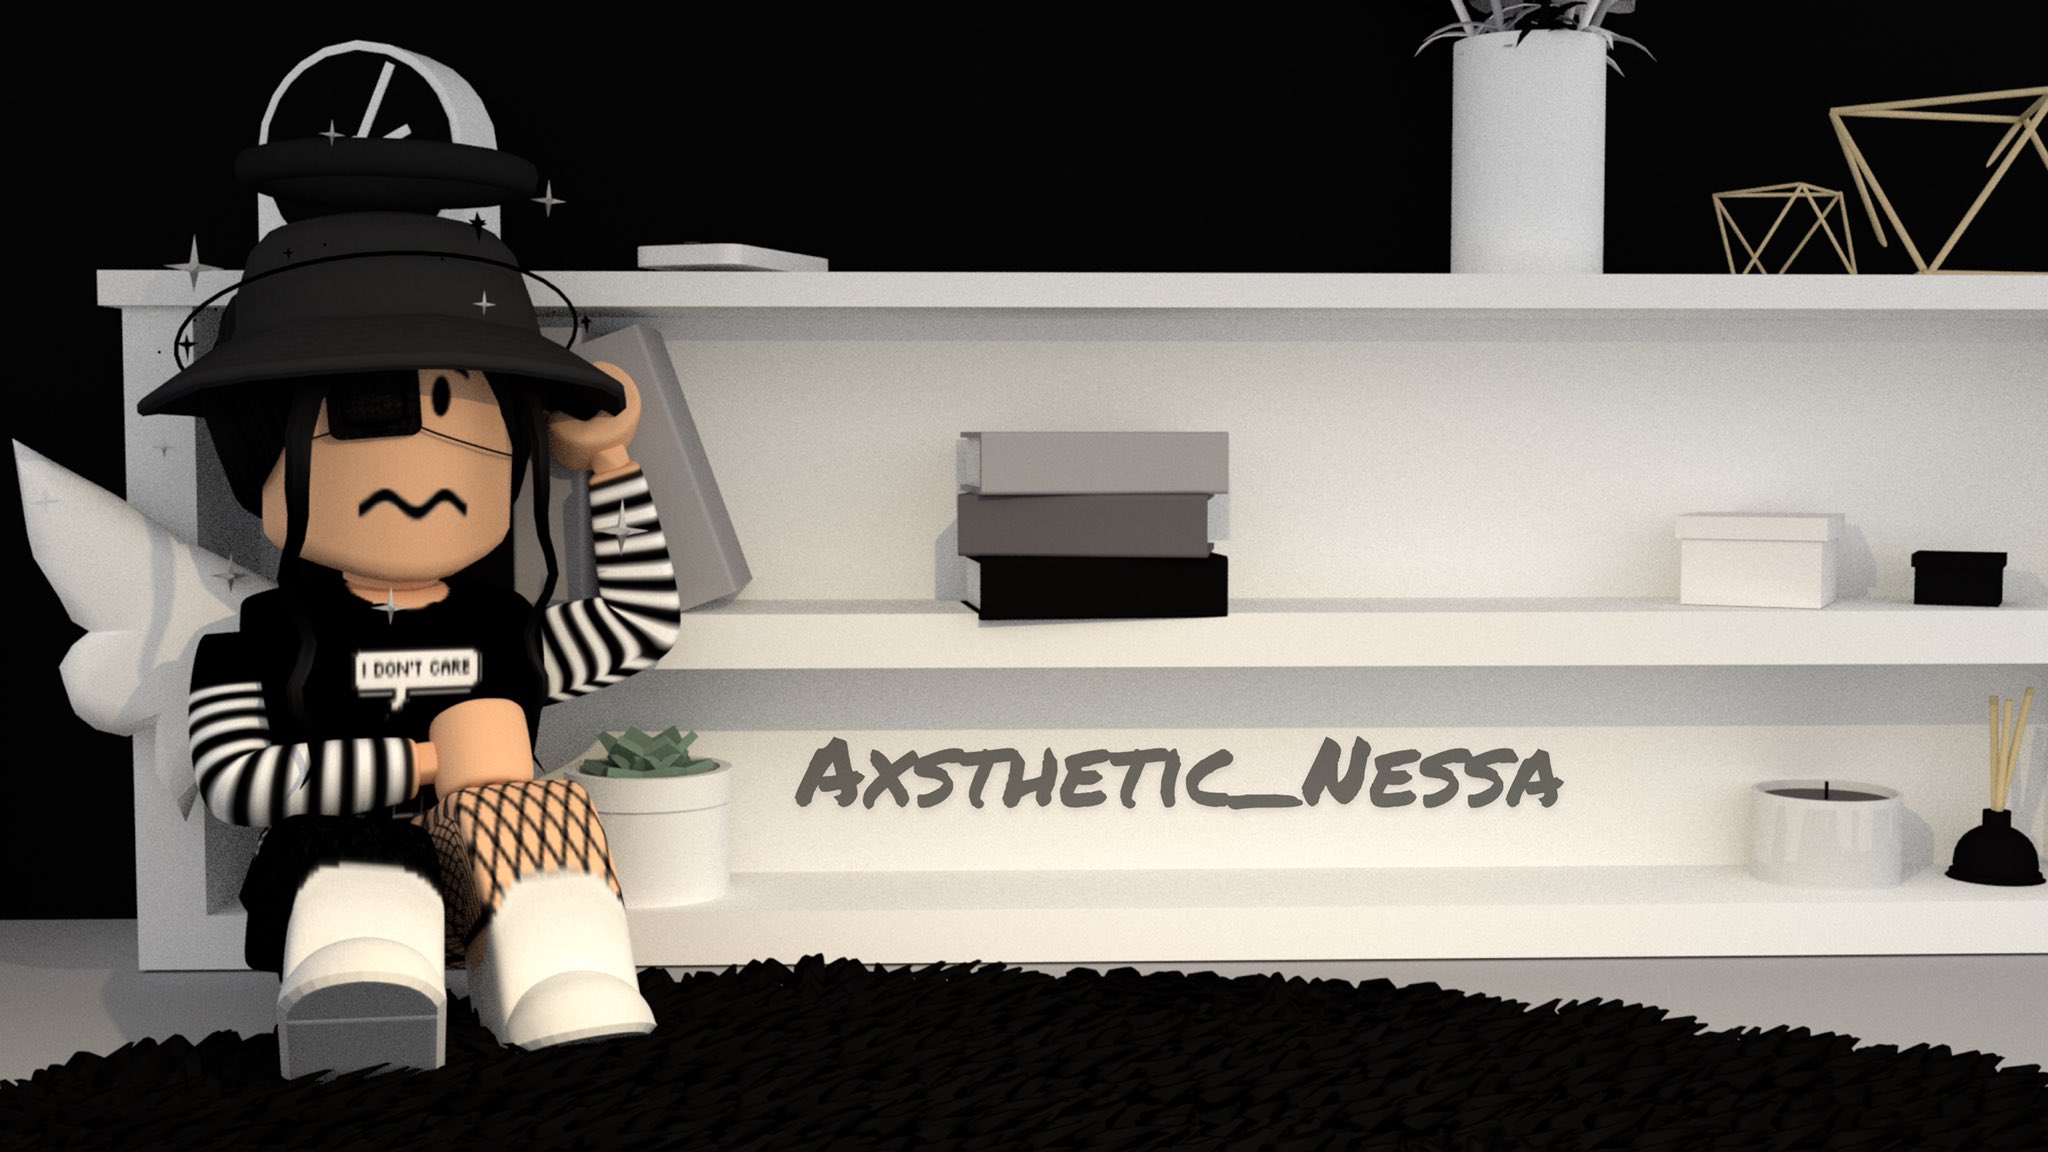 Nessa Inactive On Twitter Gfx Raffle Rules Follow Pxnda Jxhn Rt Ends In 24 Hrs O Examples - dark aesthetic aesthetic gfx roblox girl